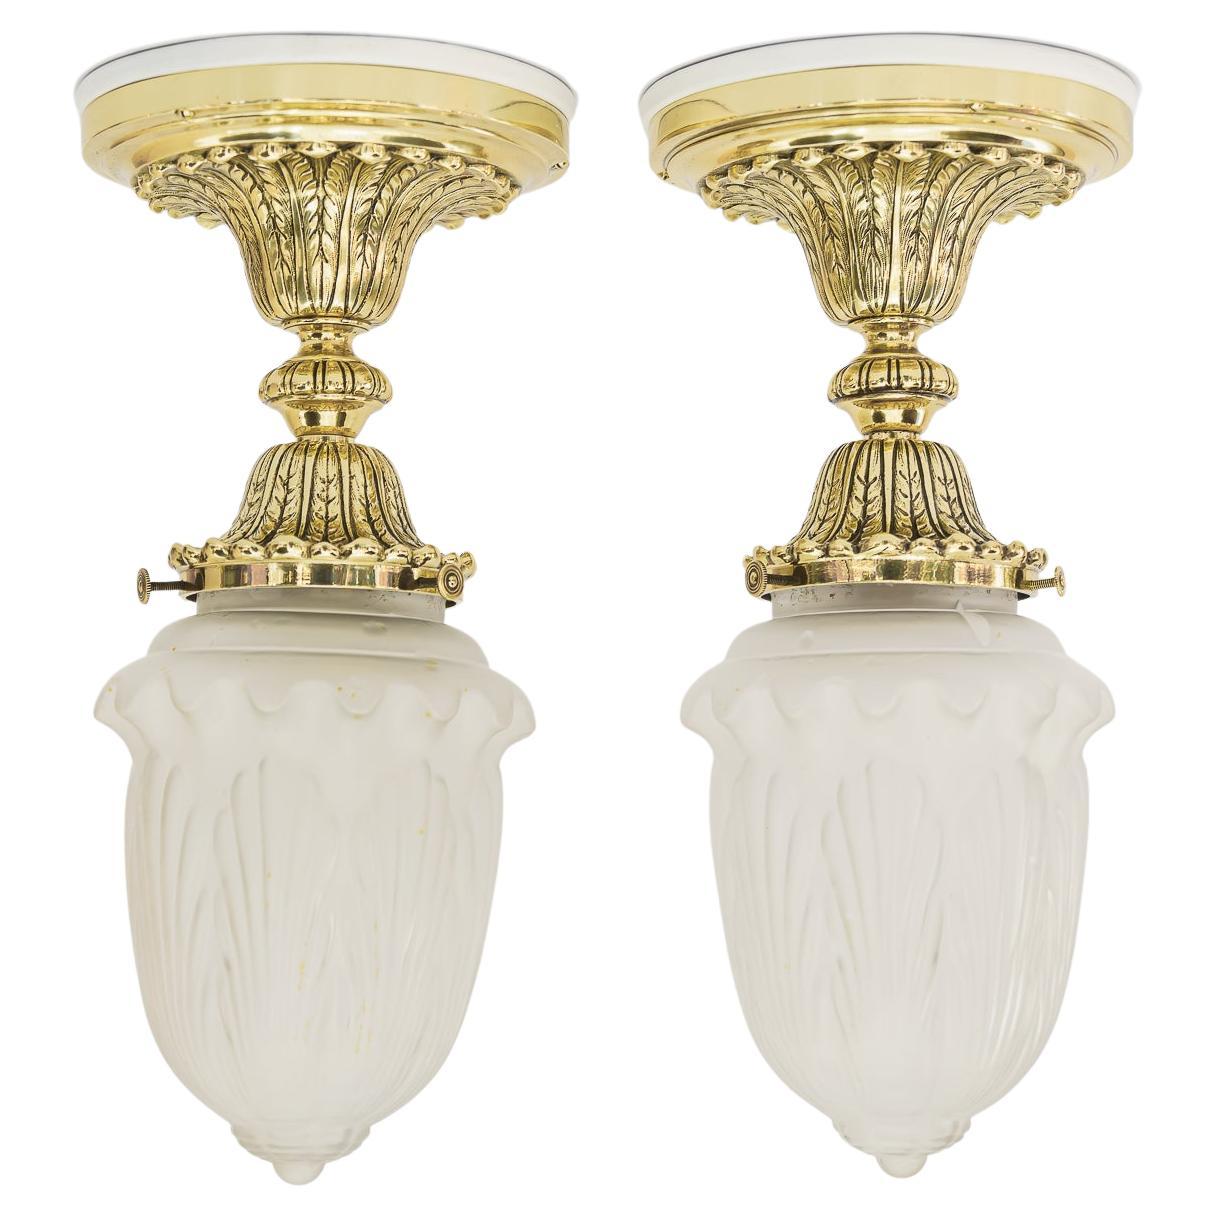 2 Historistic Ceiling Lamps with Original Old Glass Shades Vienna Around 1890s For Sale